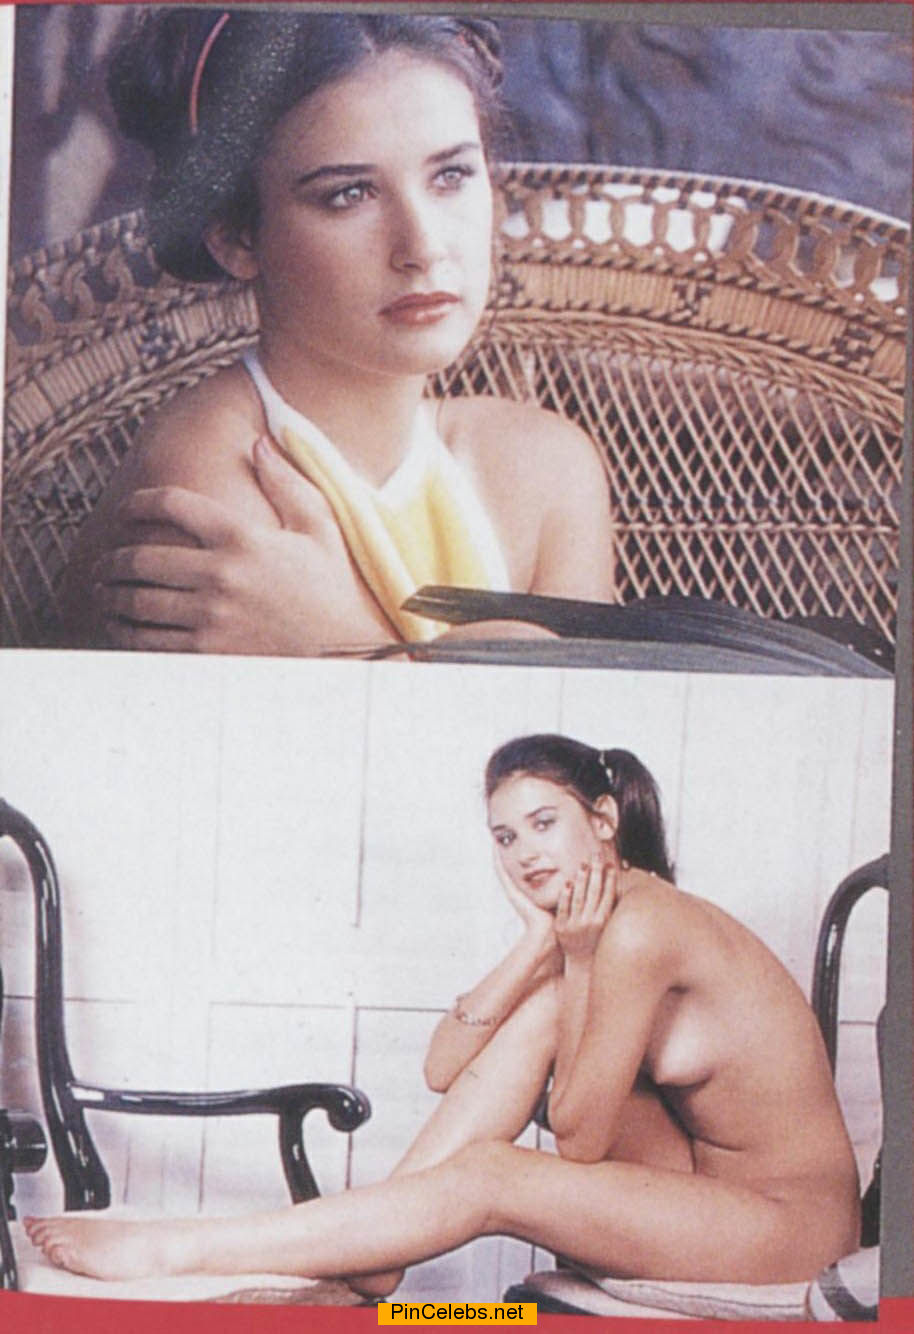 demi-moore stripped